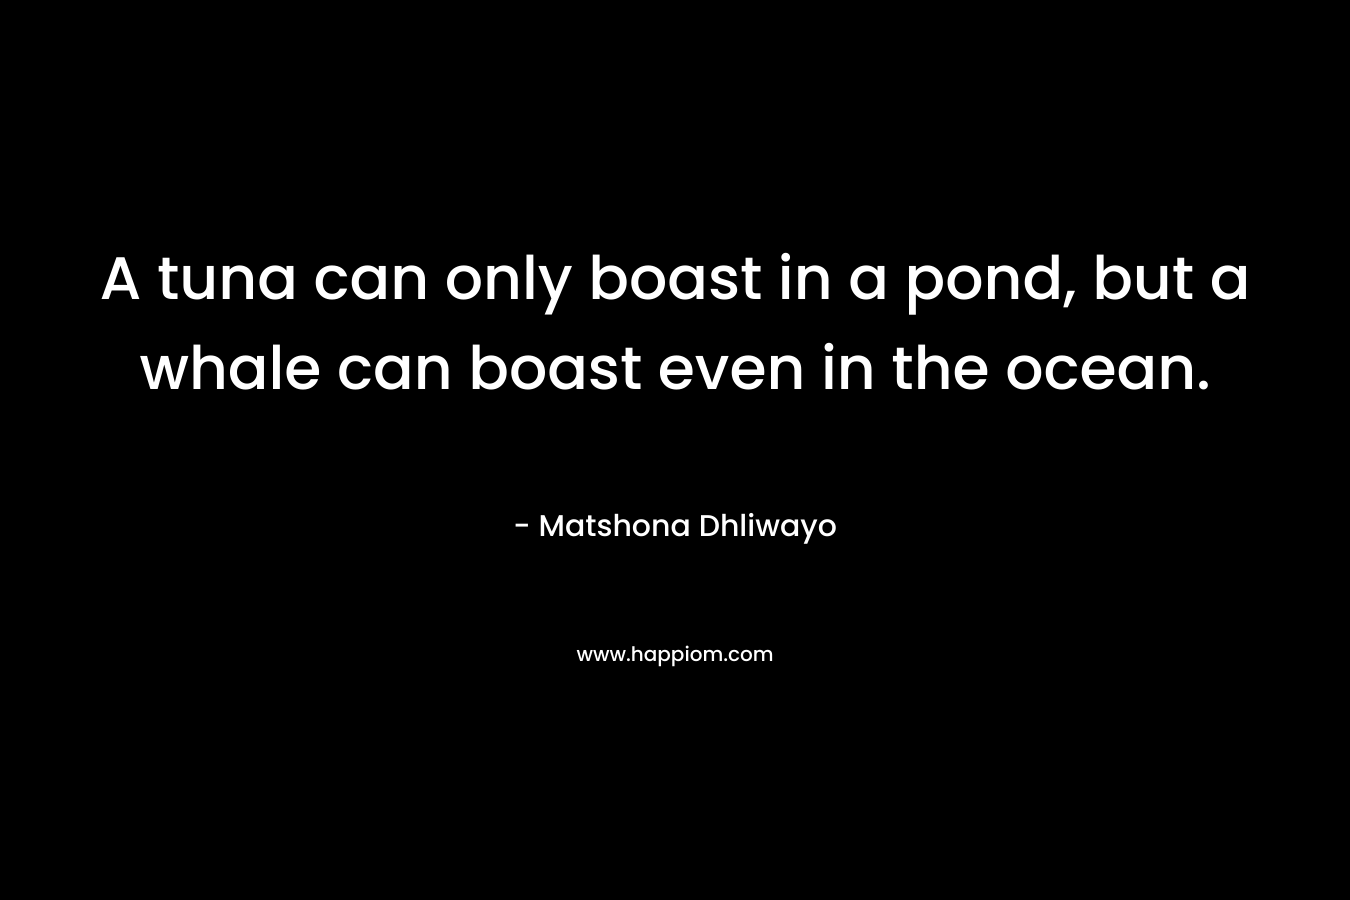 A tuna can only boast in a pond, but a whale can boast even in the ocean.